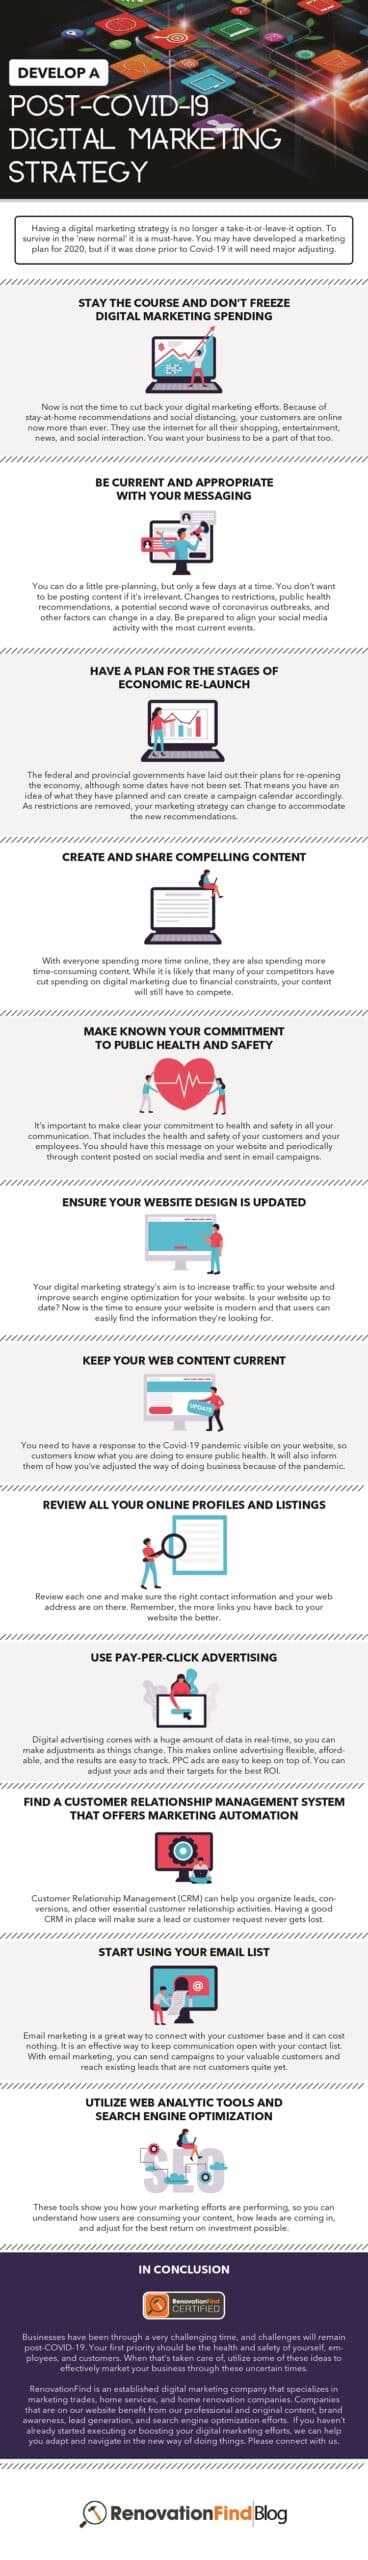 Infographic - Post Covid Digital Marketing Strategy